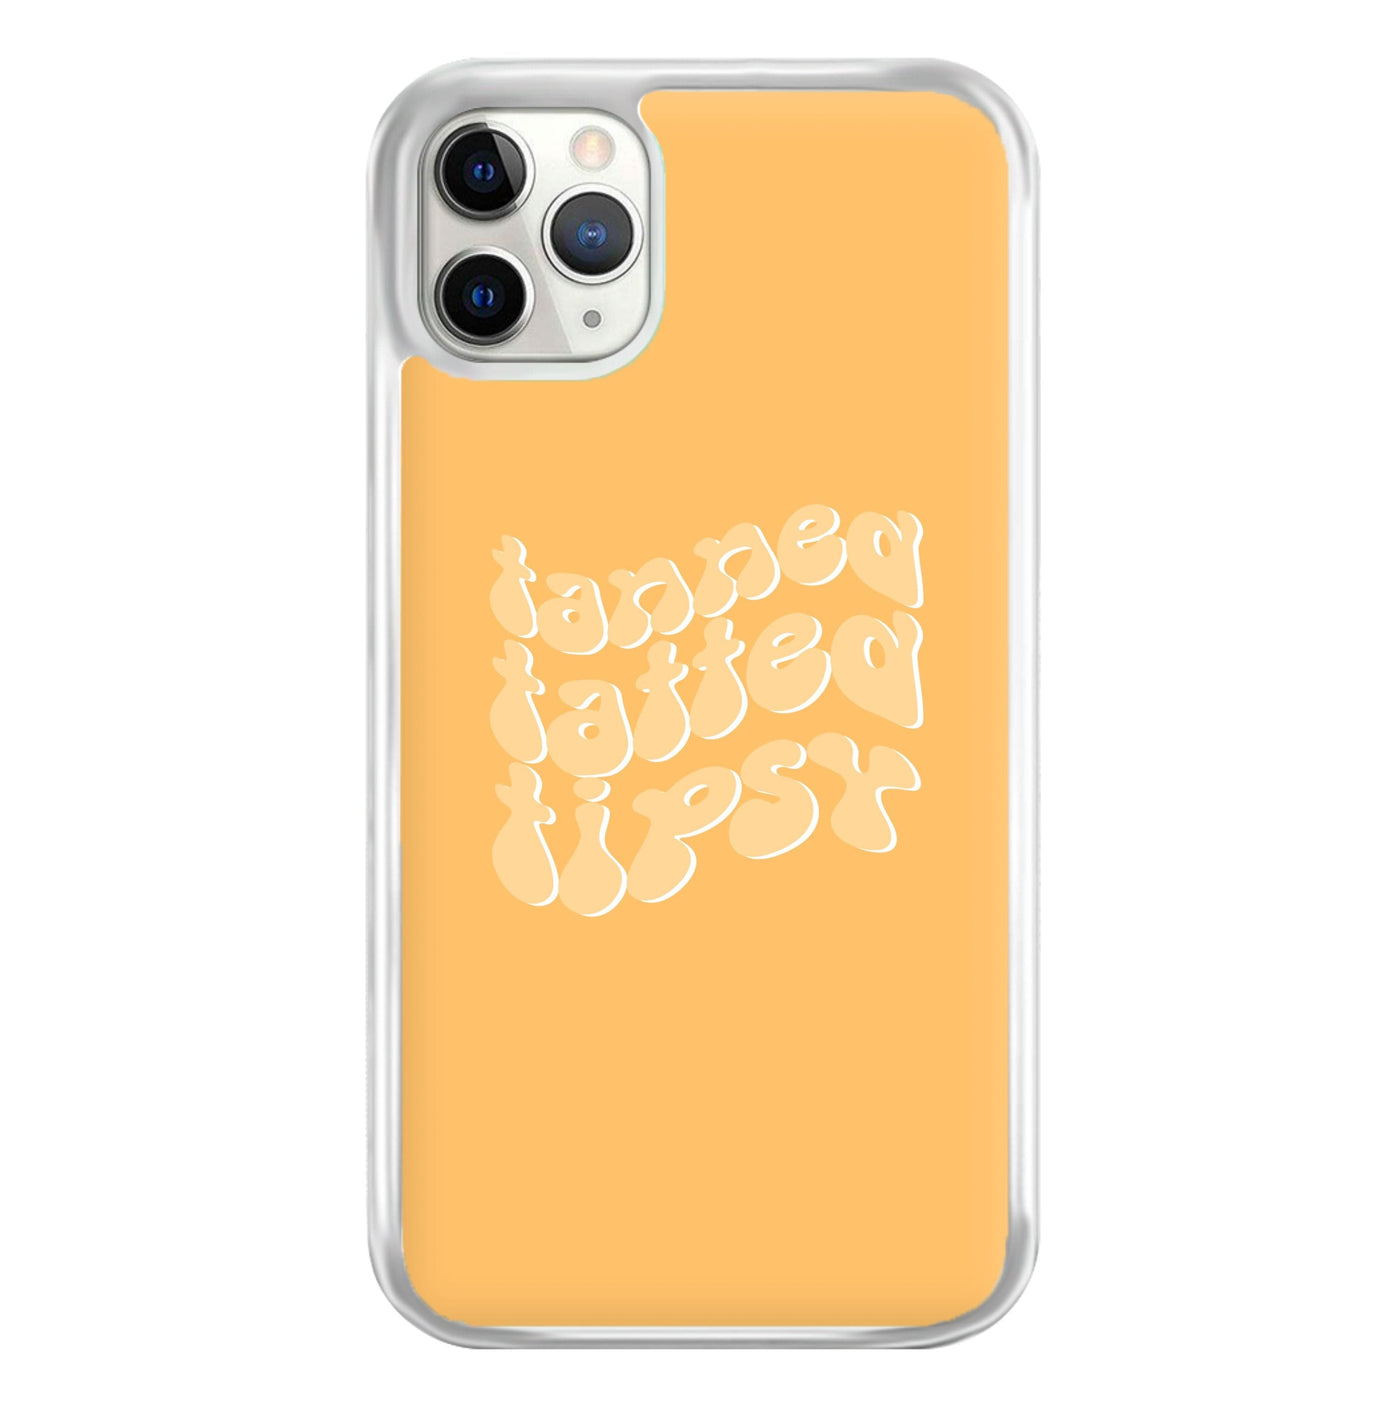 Tanned Tatted Tipsy - Summer Quotes Phone Case